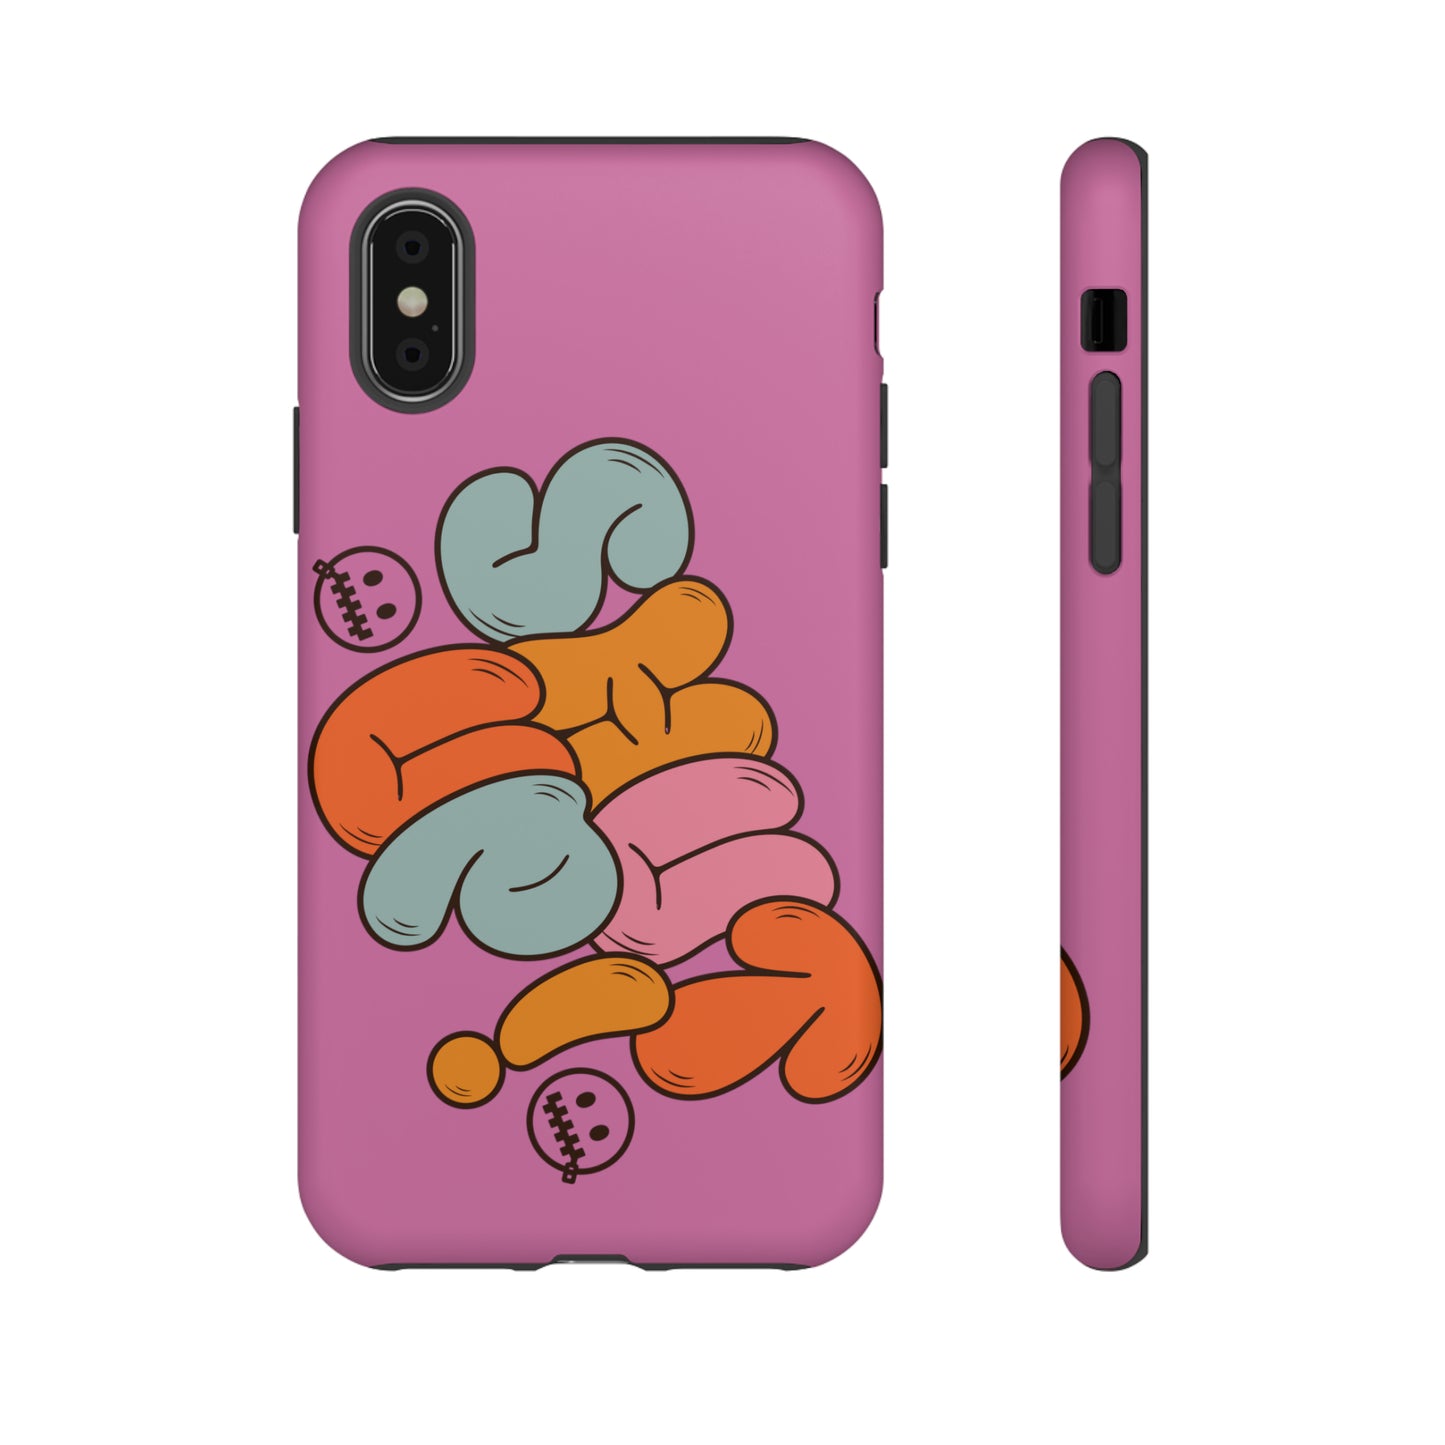 Eye-catching psychedelic 'Shut Up' phone case for Pixel